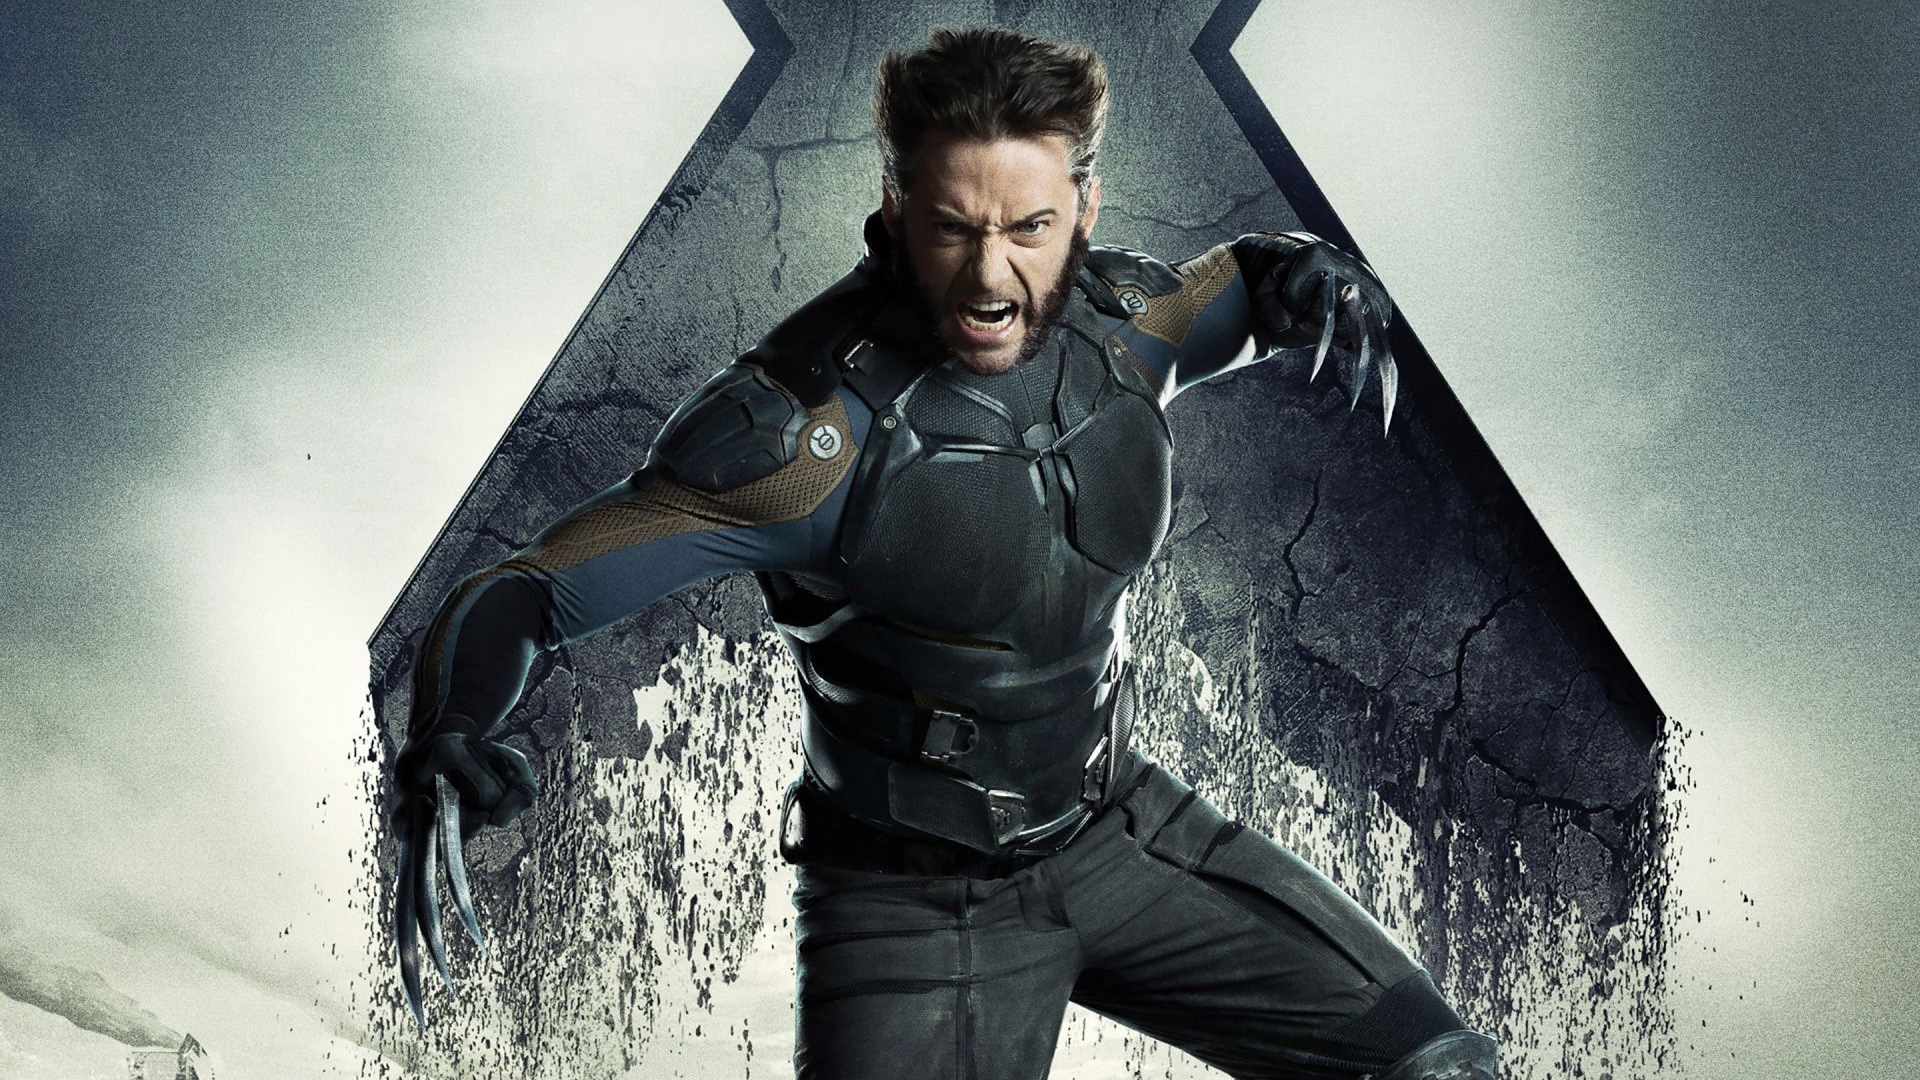 2014 X-Men: Days of Future Past HD wallpapers #3 - 1920x1080